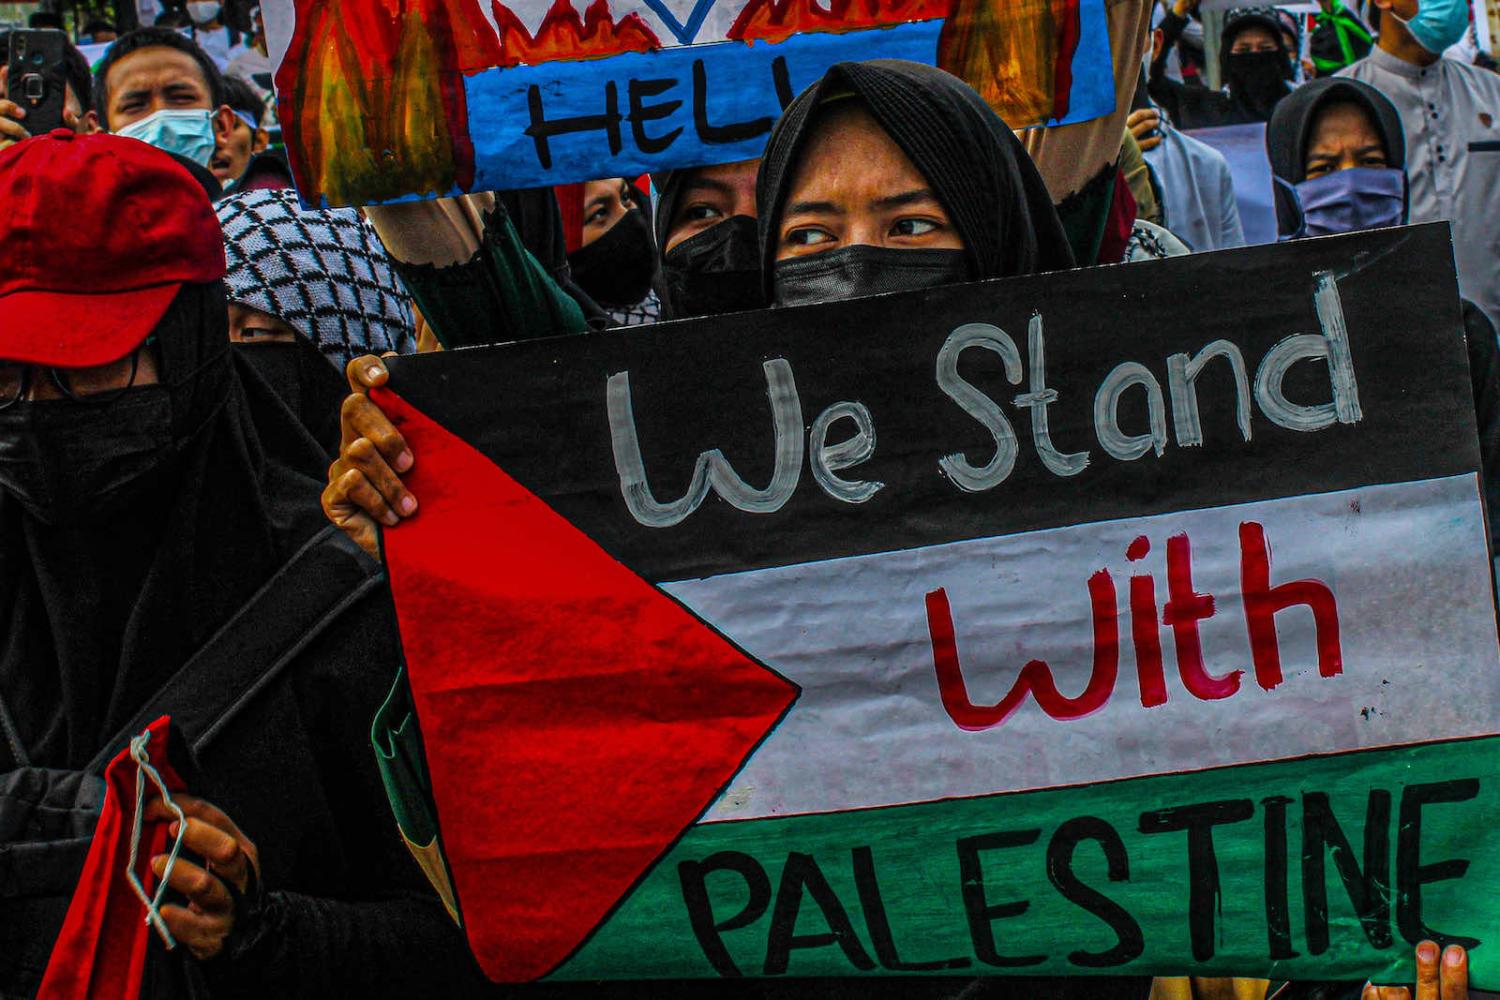 Demonstration in Jakarta in support of Palestinians, 21 May (Fazjri Abdillah/Riau Images/Barcroft Media via Getty Images)